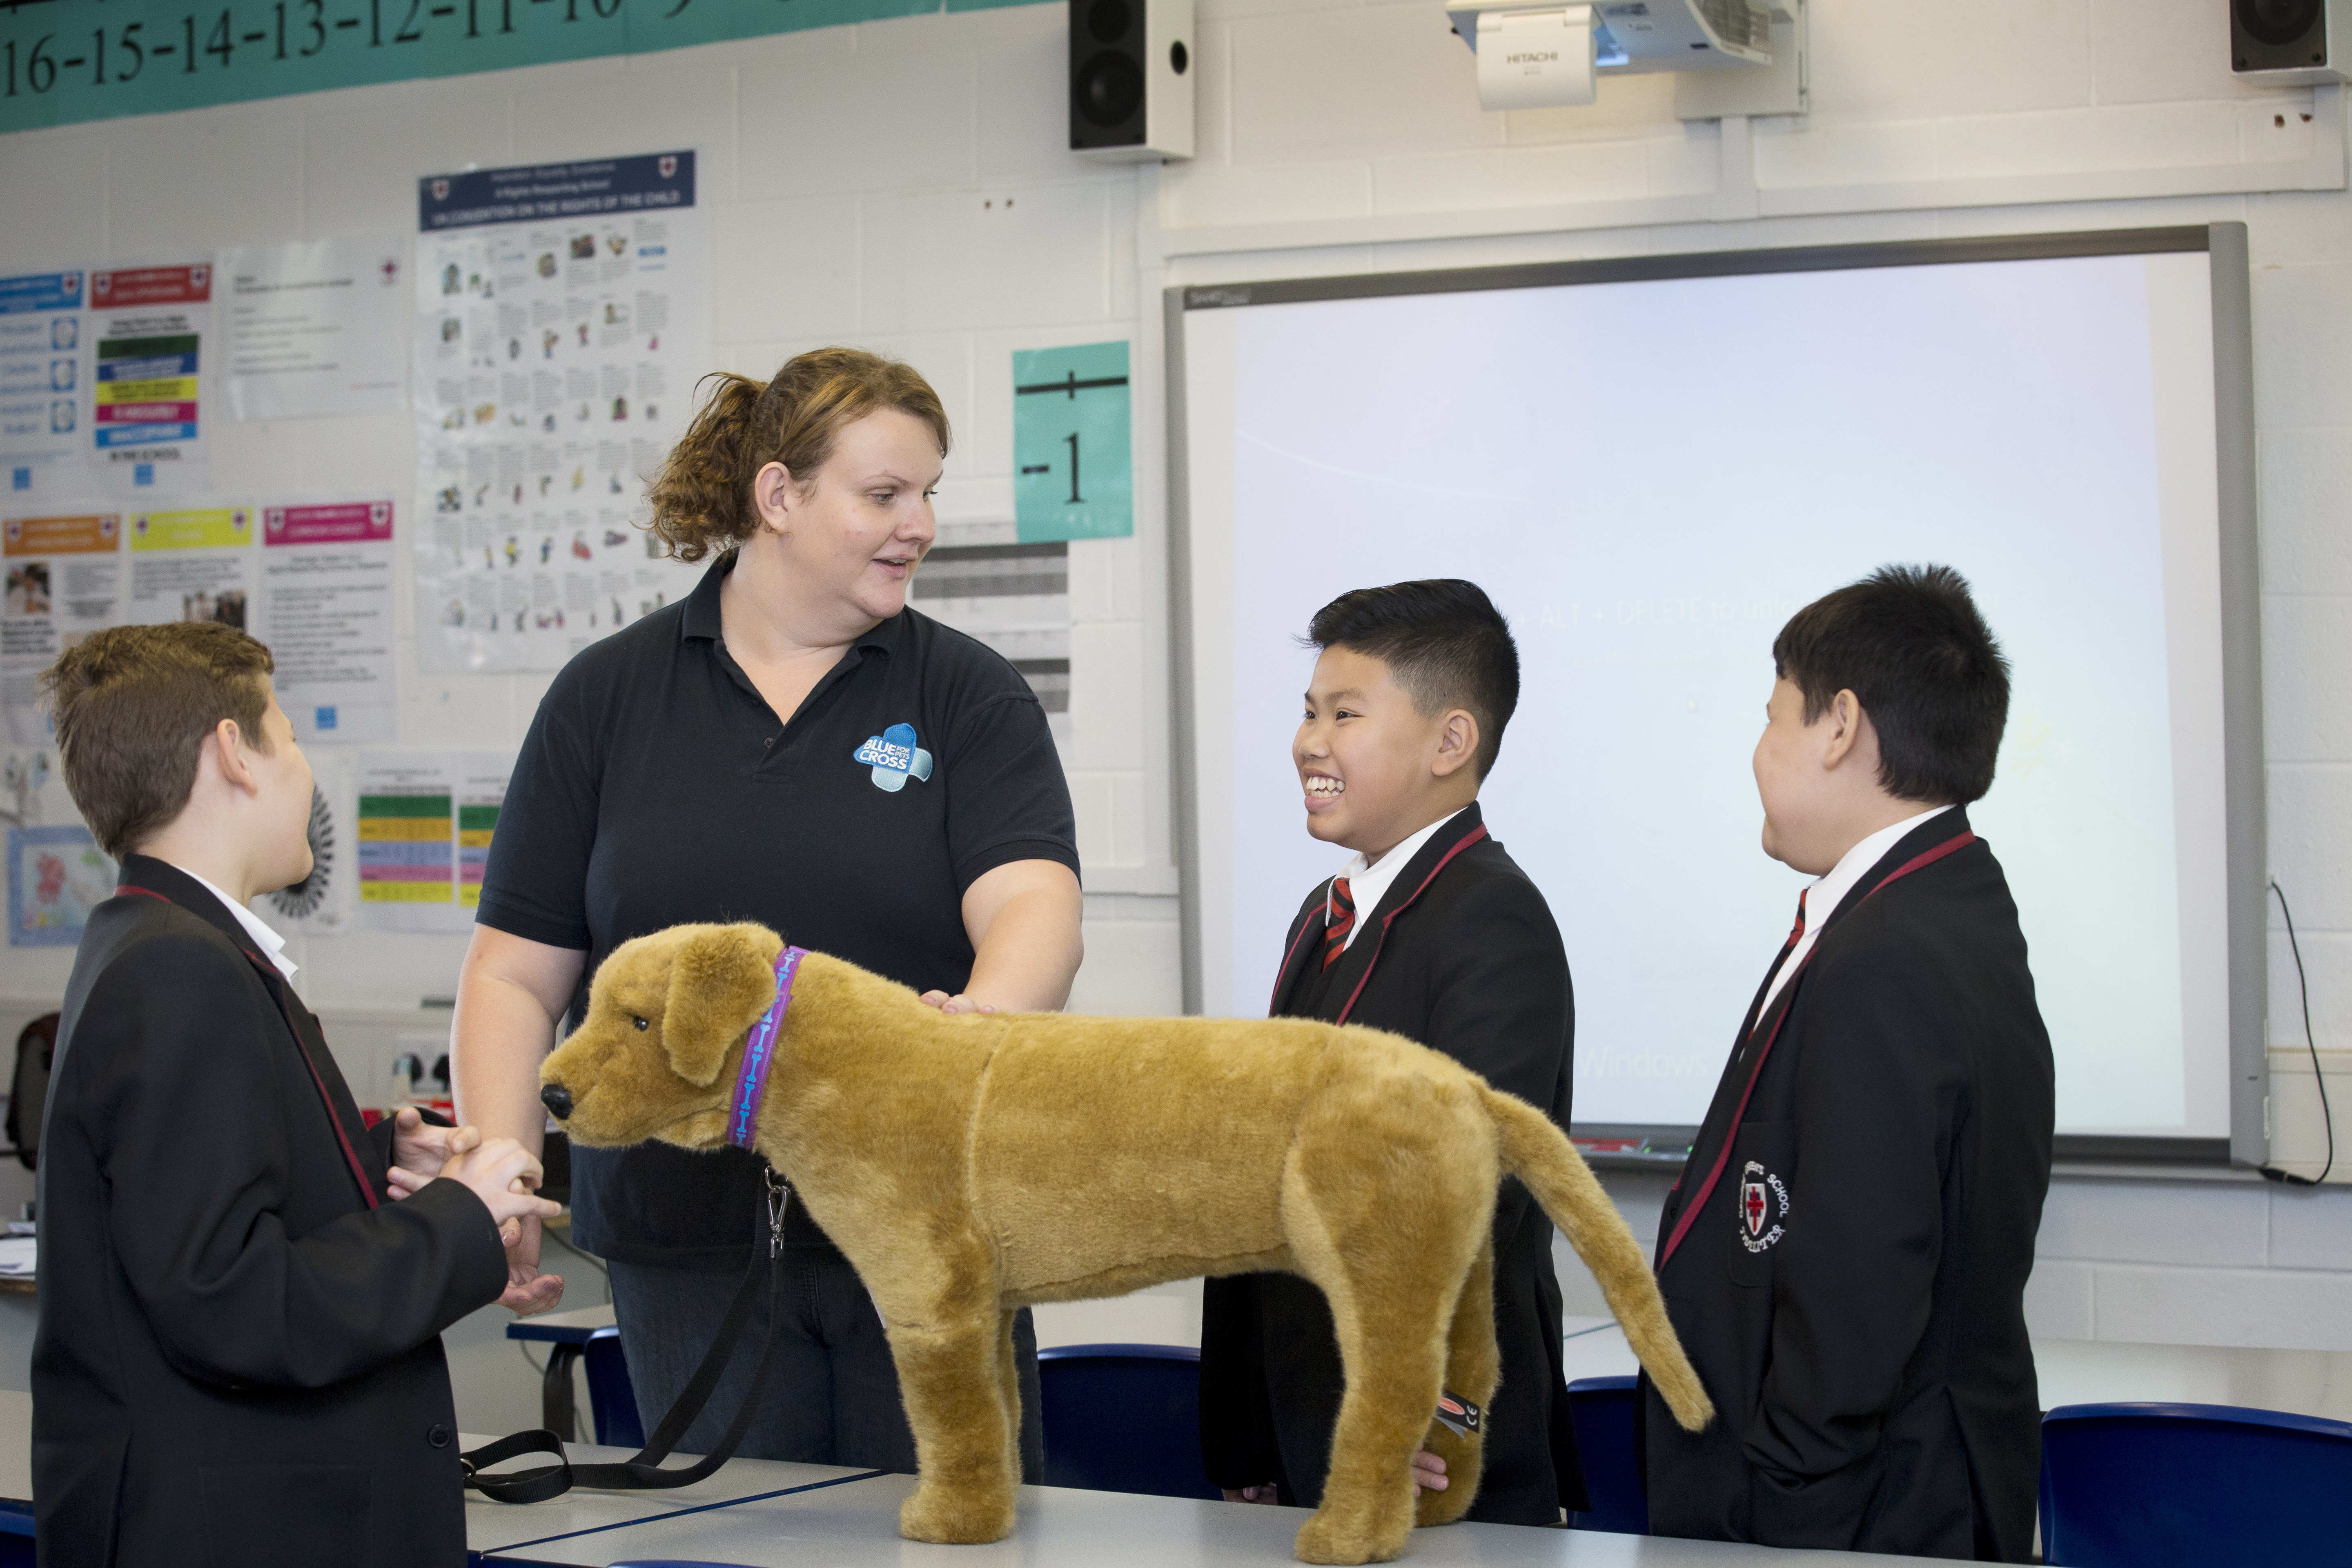 Education Officer Kaye with school children learning about dog safety